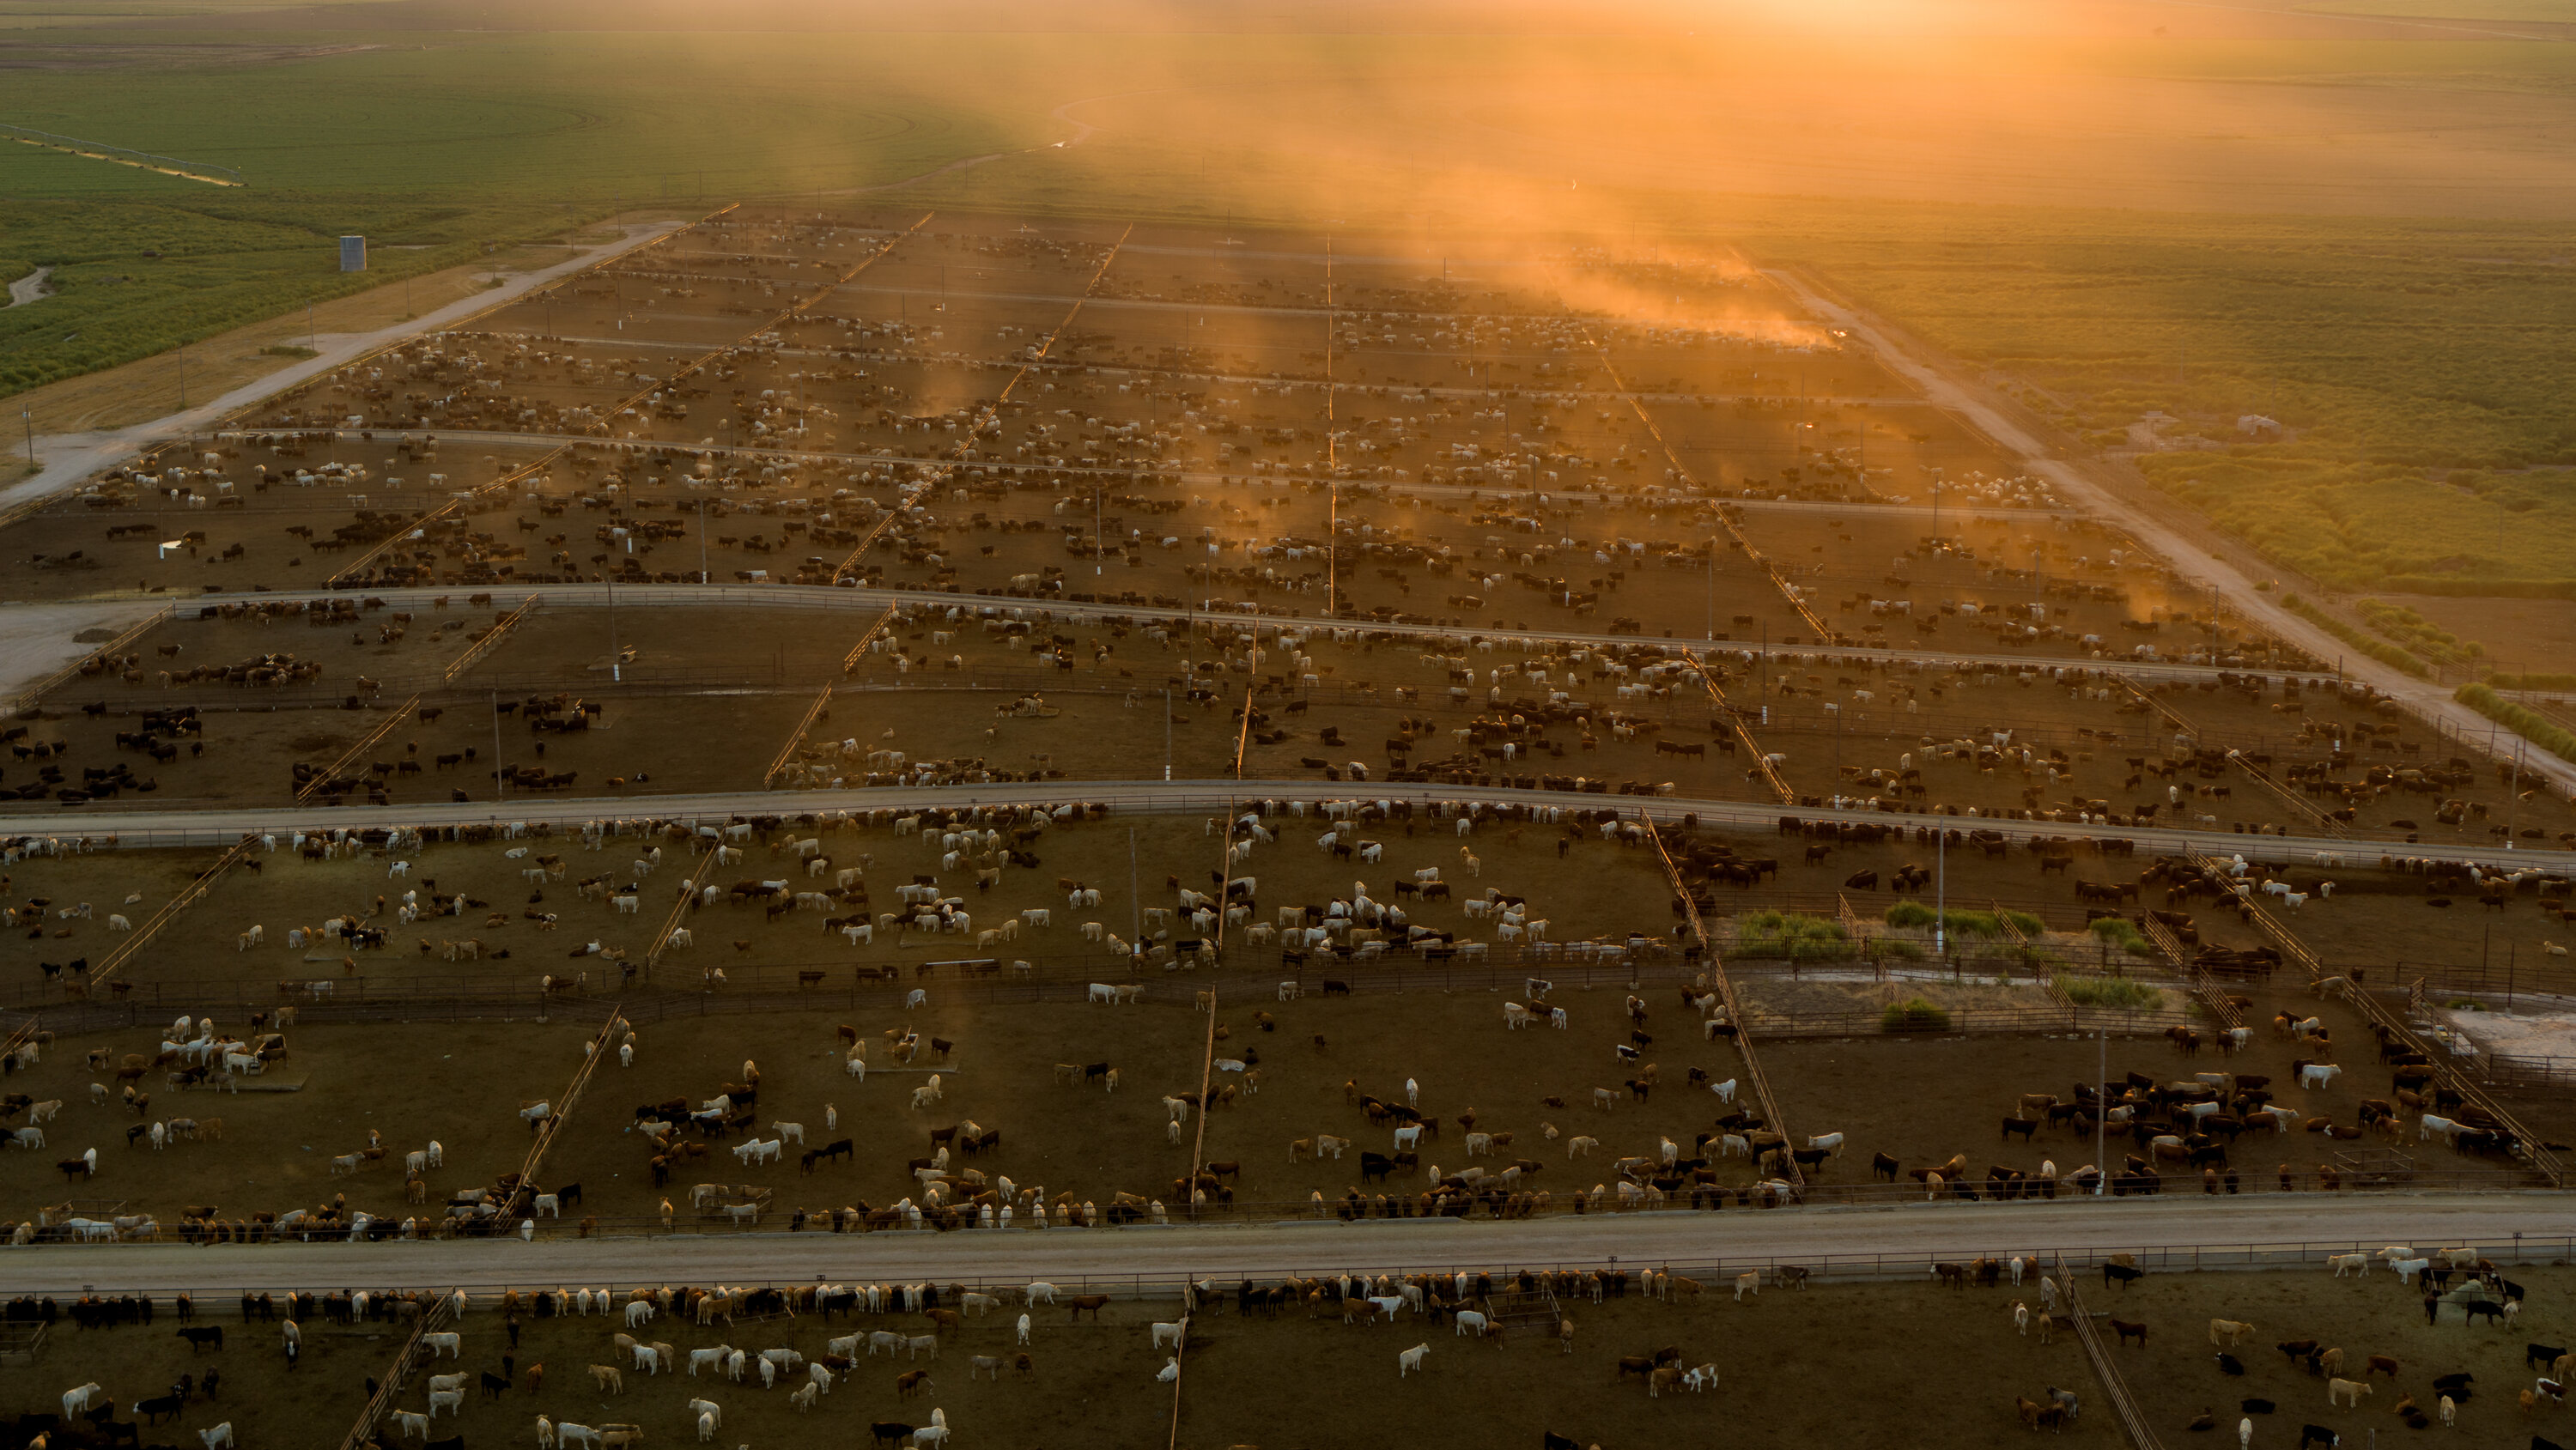 Belching Cows and Endless Feedlots: Fixing Cattle’s Climate Issues